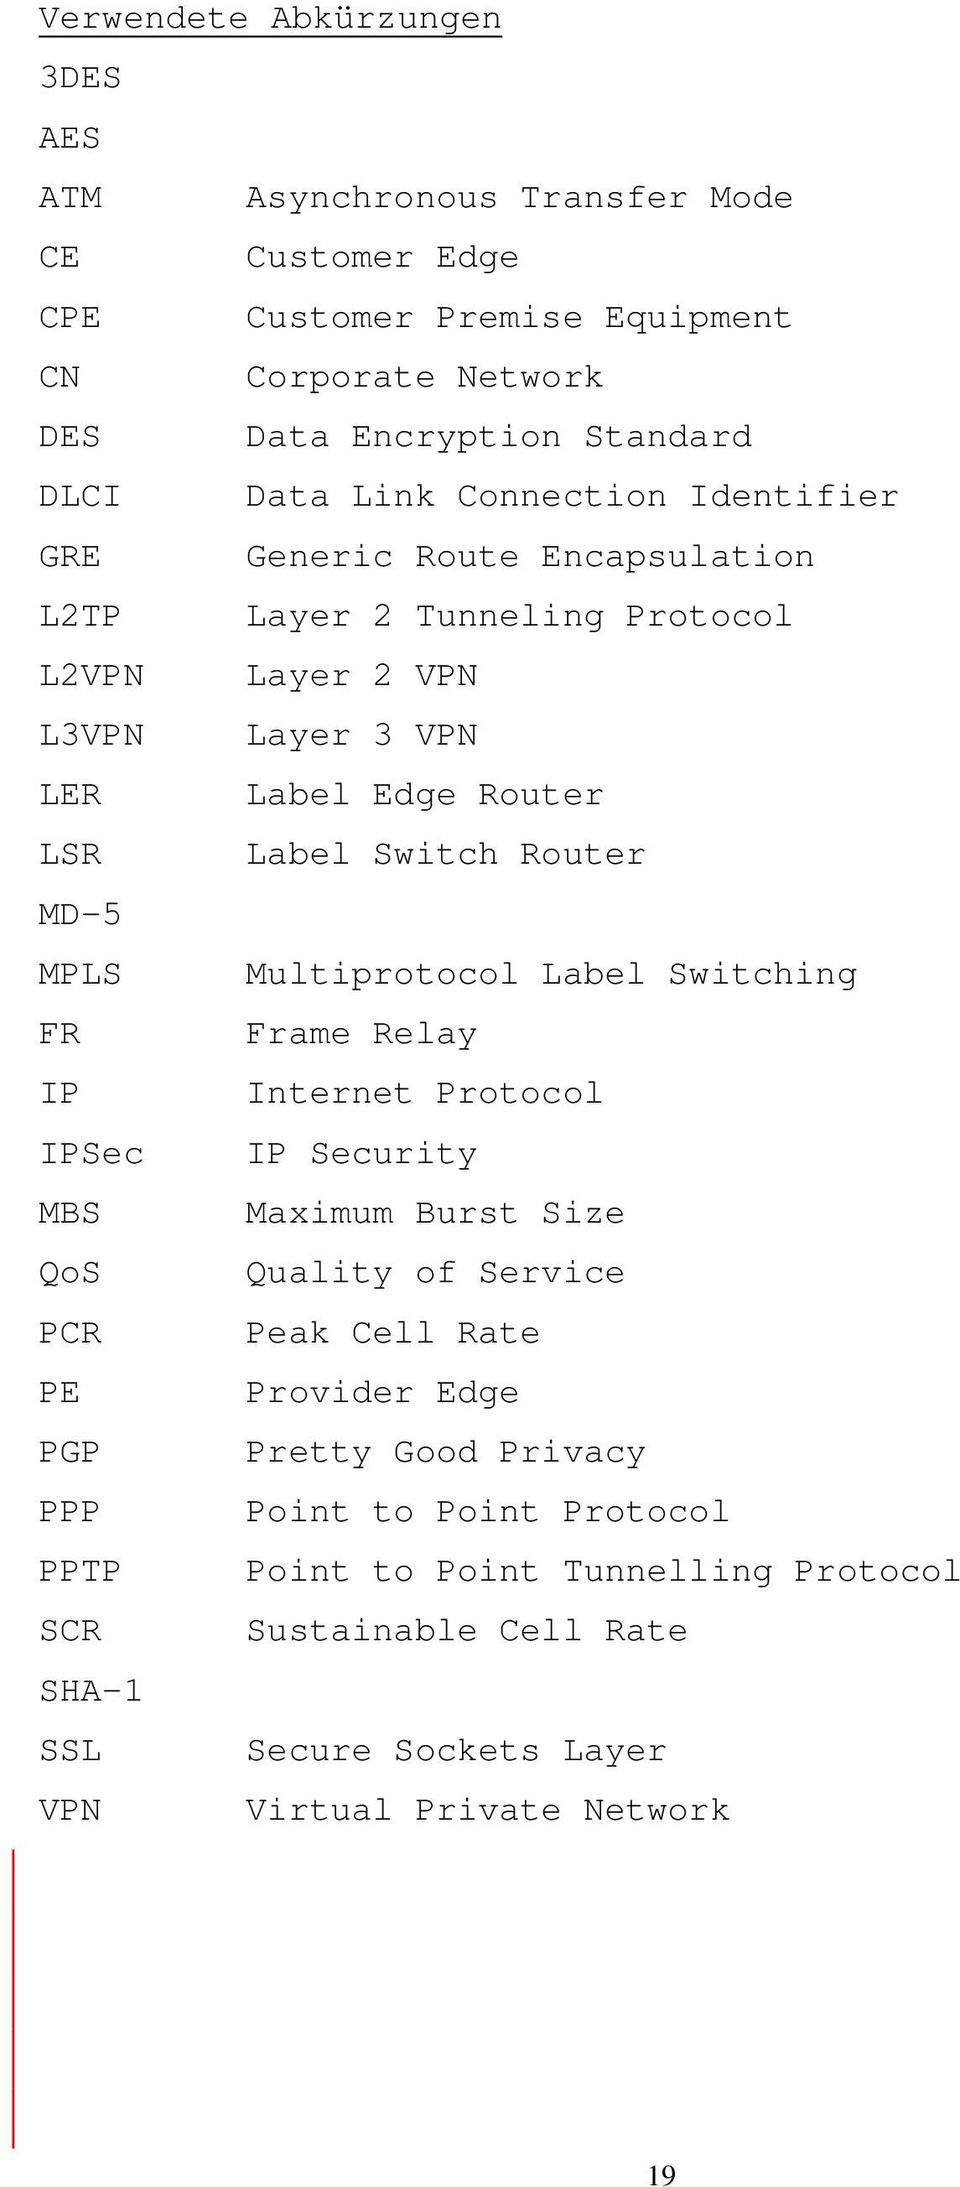 MD-5 MPLS Multiprotocol Label Switching FR Frame Relay IP Internet Protocol IPSec IP Security MBS Maximum Burst Size QoS Quality of Service PCR Peak Cell Rate PE Provider